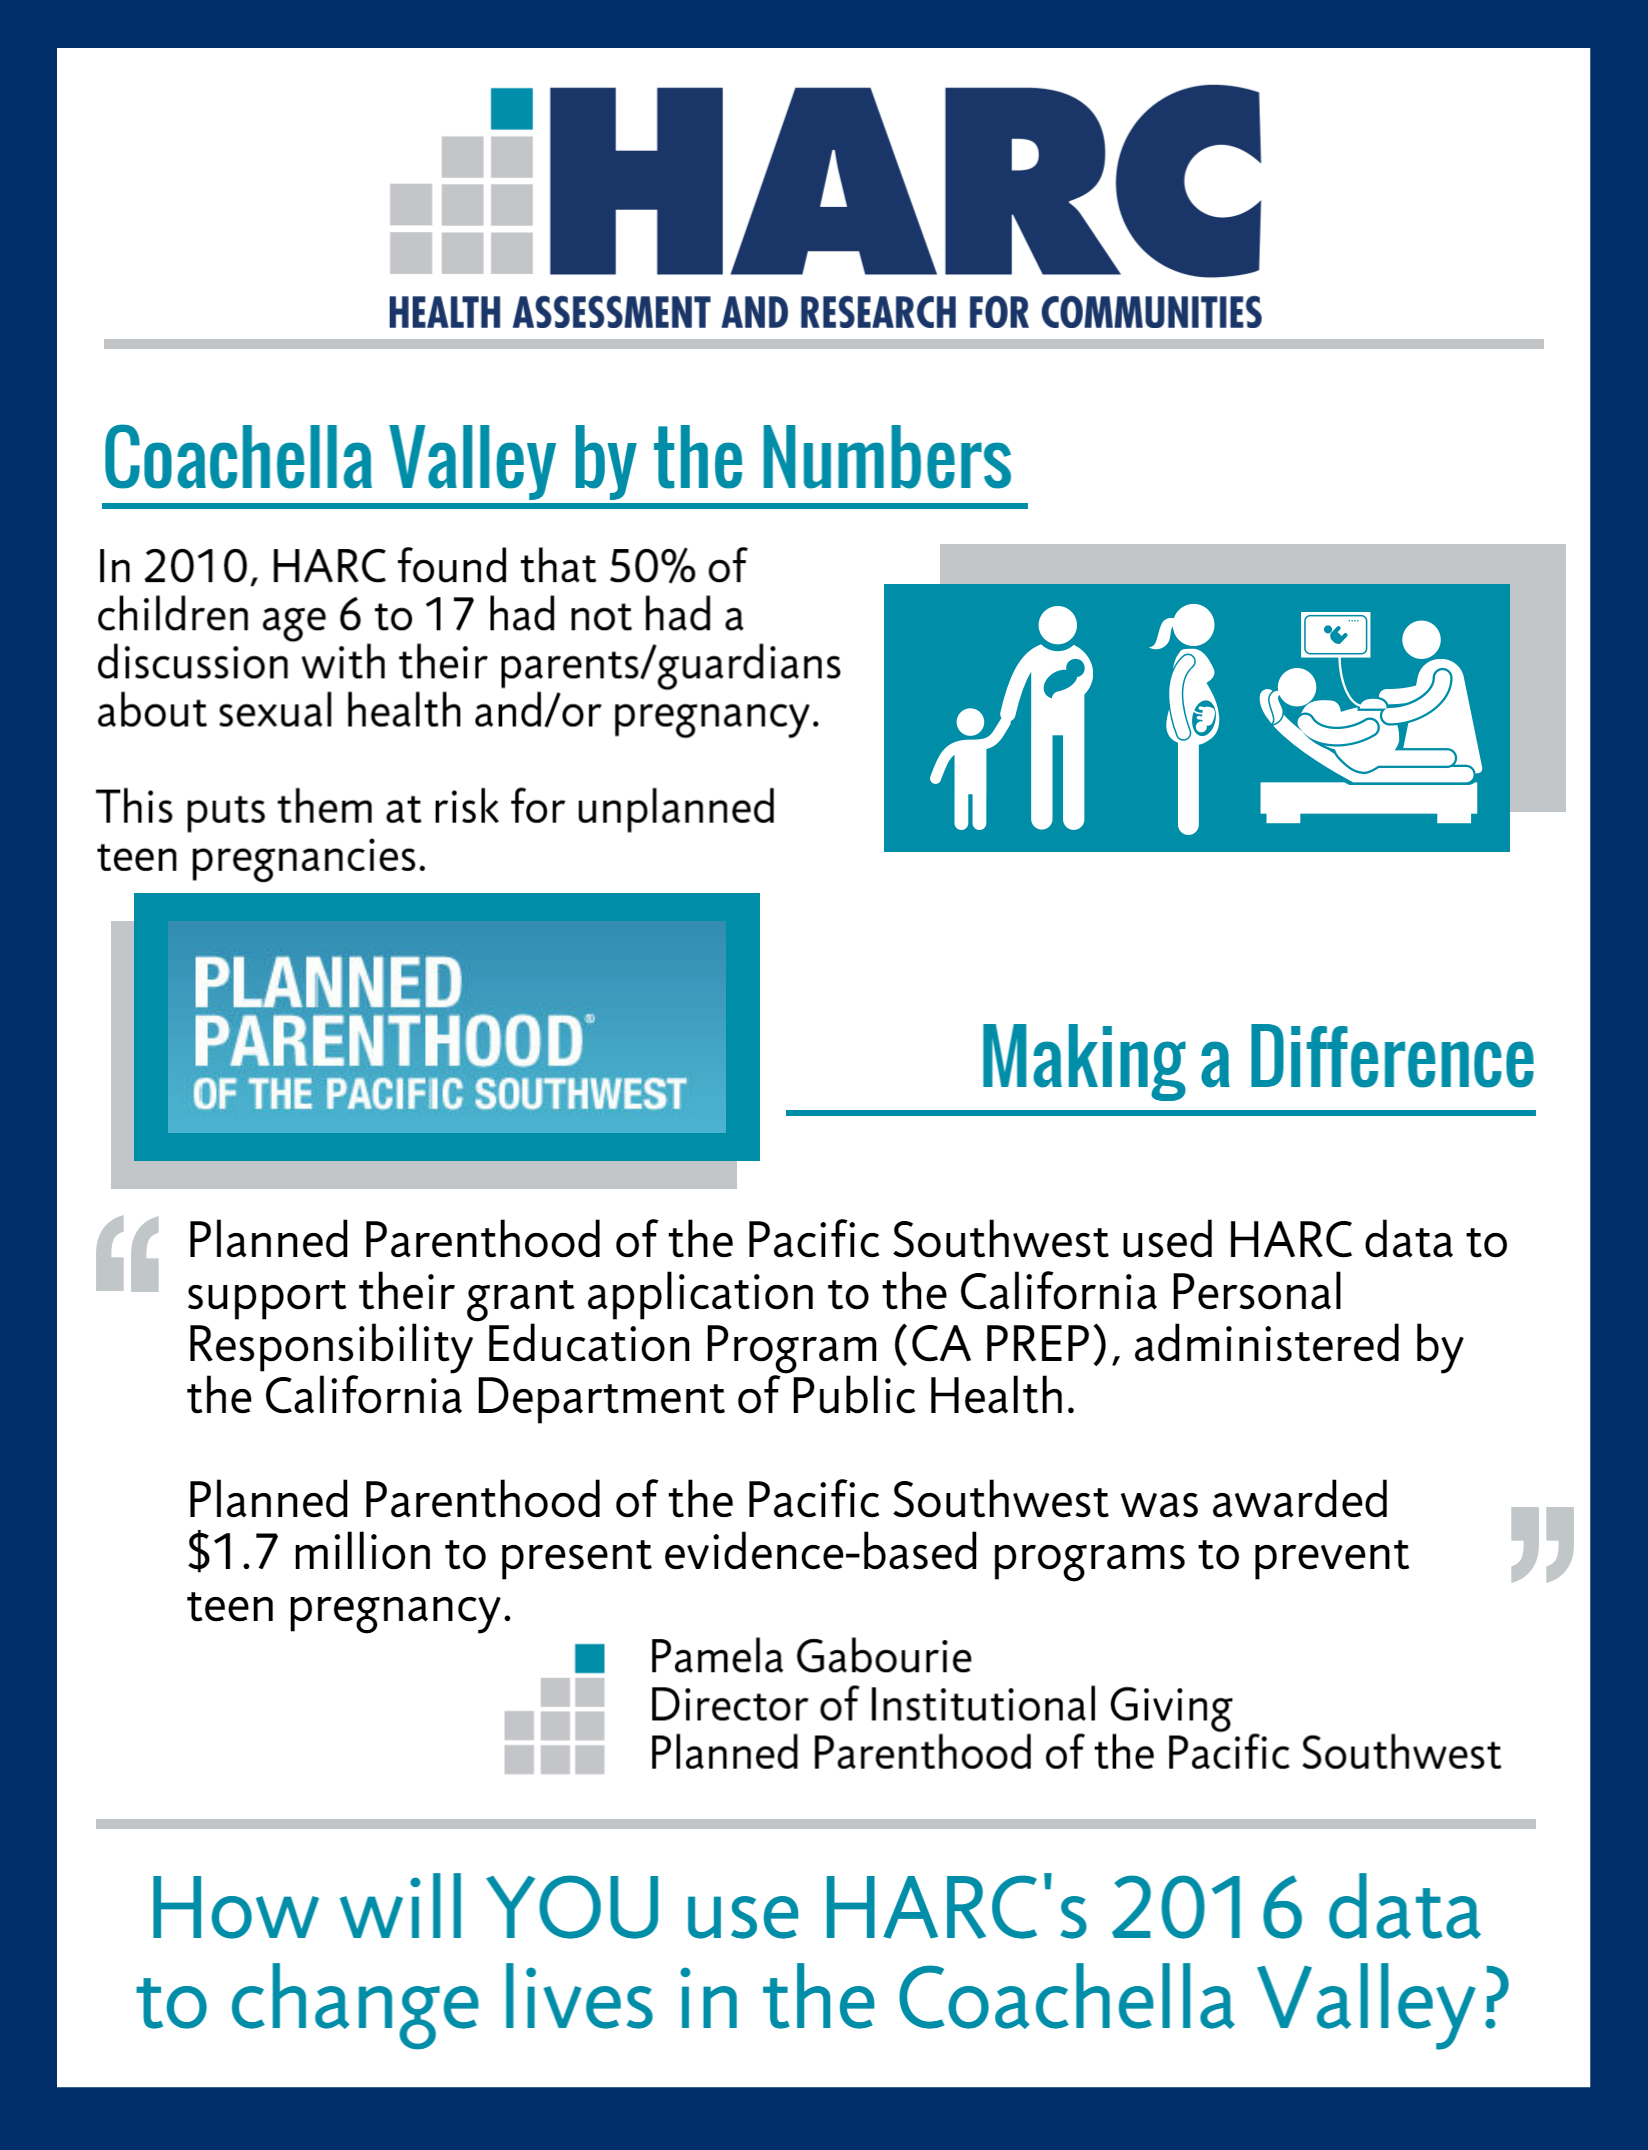 Coachella Valley by the Numbers: In 2010, HARC found that 50$ of children age 6 to 17 had not had a discussion with their parents/guardians about sexual health and/or pregnancy. This puts them at risk for unplanned pregnancies. Making a Difference: Planned Parenthood of the Pacific Southwest used HARC data to support their grant application to the California Personal Responsibility Program (CA PREP), administered by the California Department of Public health. Planned Parenthood of the Pacific Southwest was awarded $1.7 million to present evidence-based programs to prevent teen pregnancy.